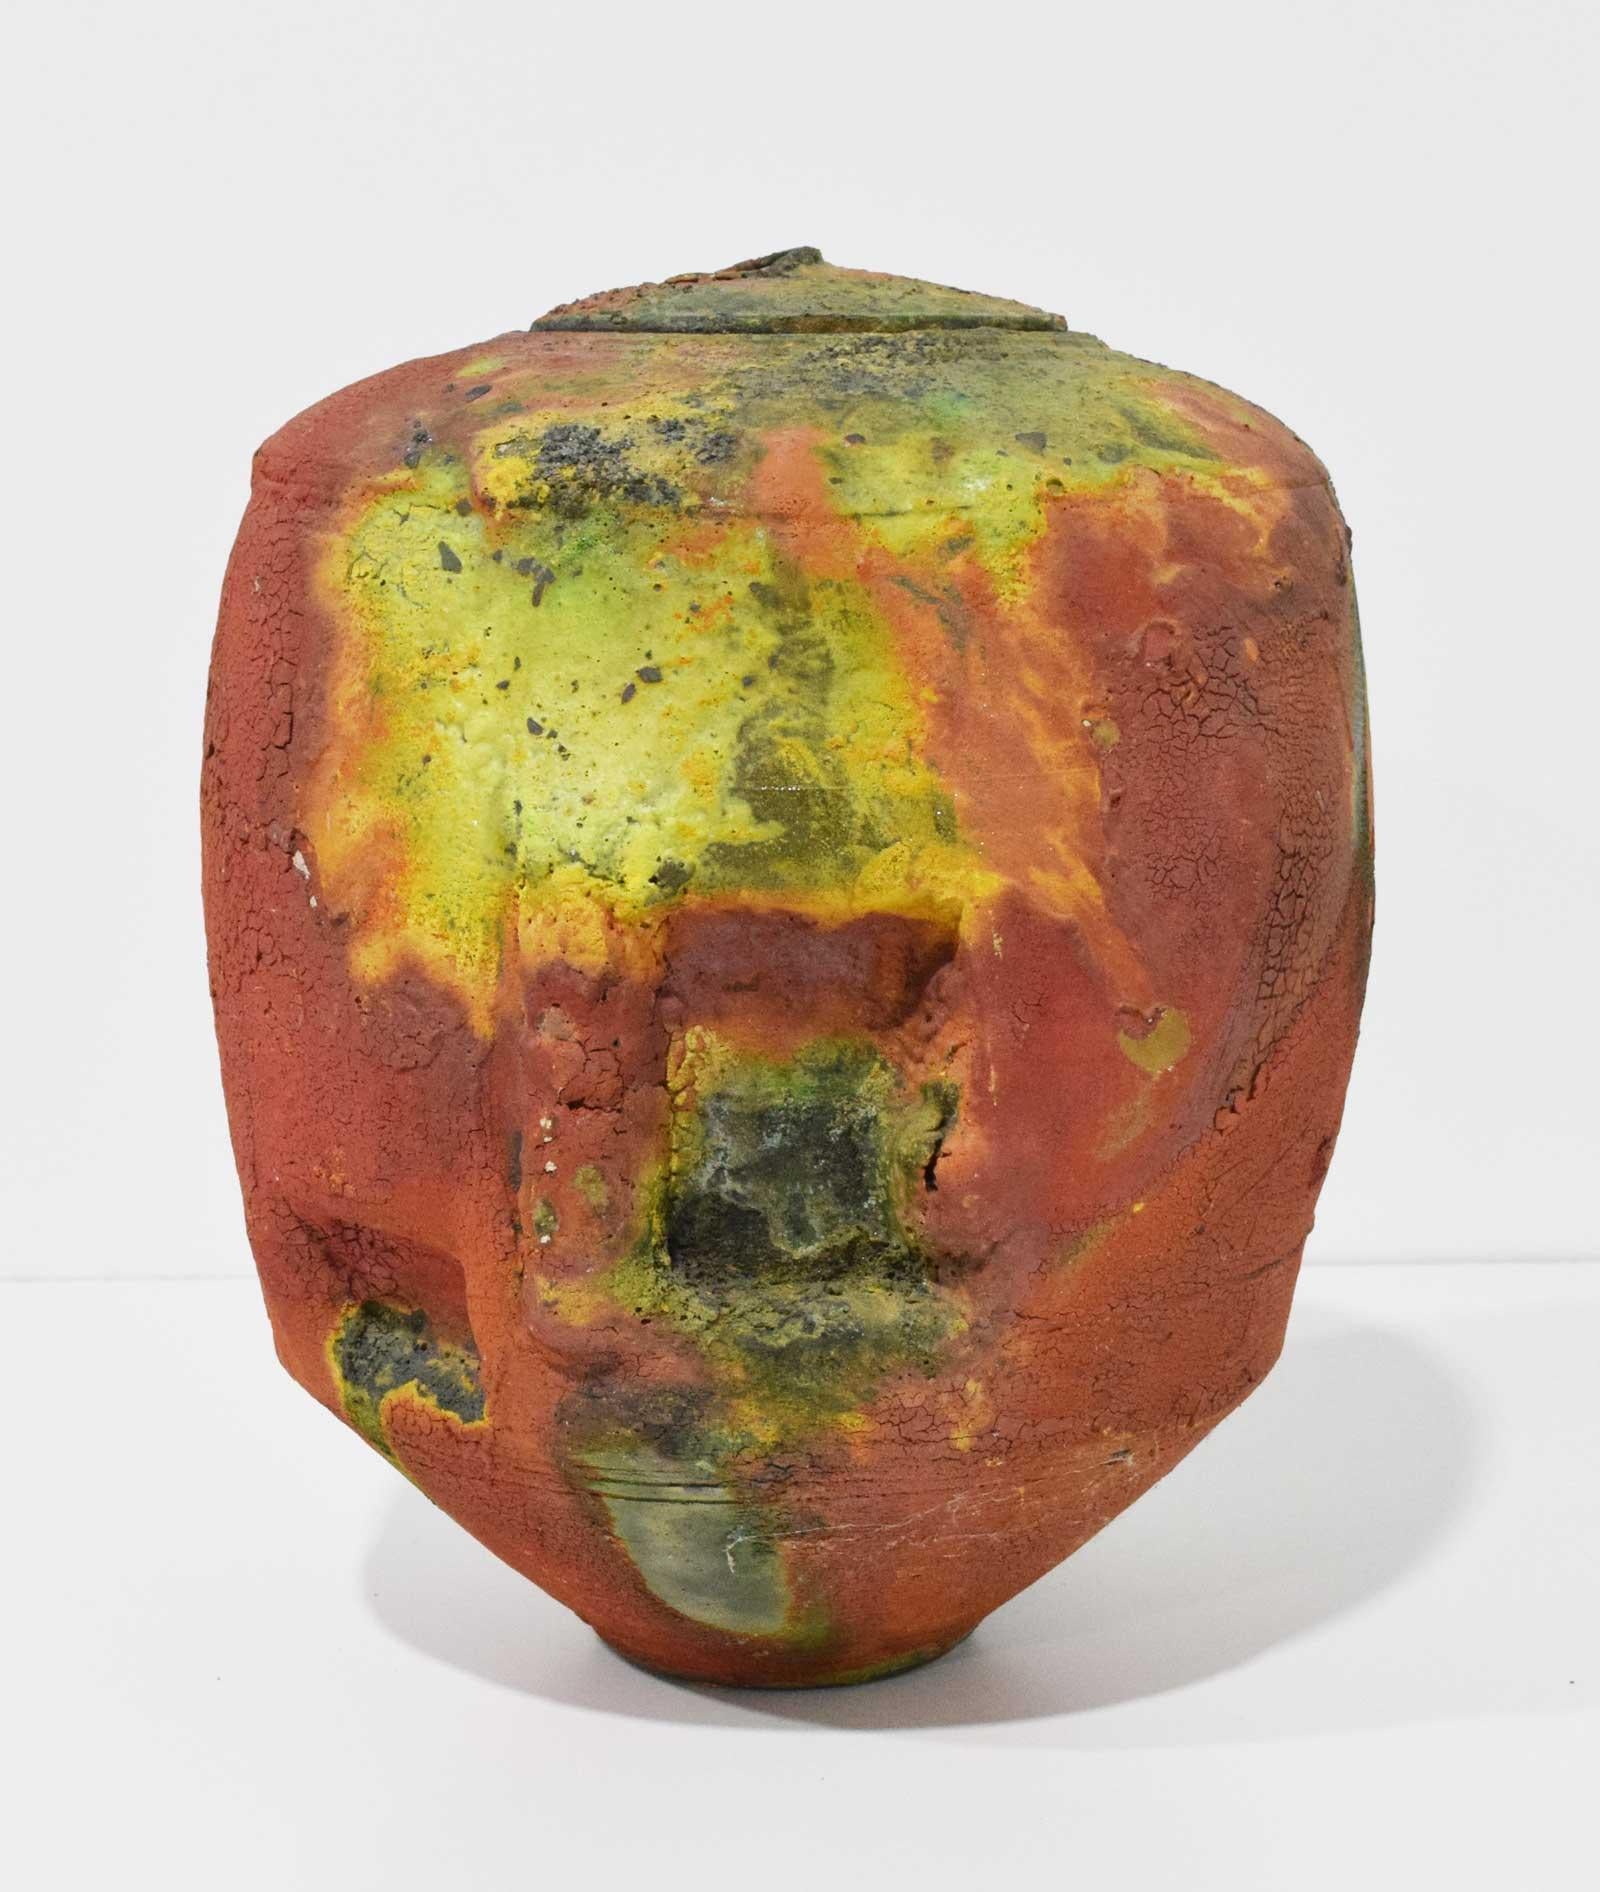 Beautiful organic shape and style, vessel appears aged and has multiple colors and textures.
Kris Cox
Born in Los Angeles, California, 1951
M.F.A., Rhode Island School of Design, Providence, Rhode Island, 1977
B.A., Claremont McKenna College,